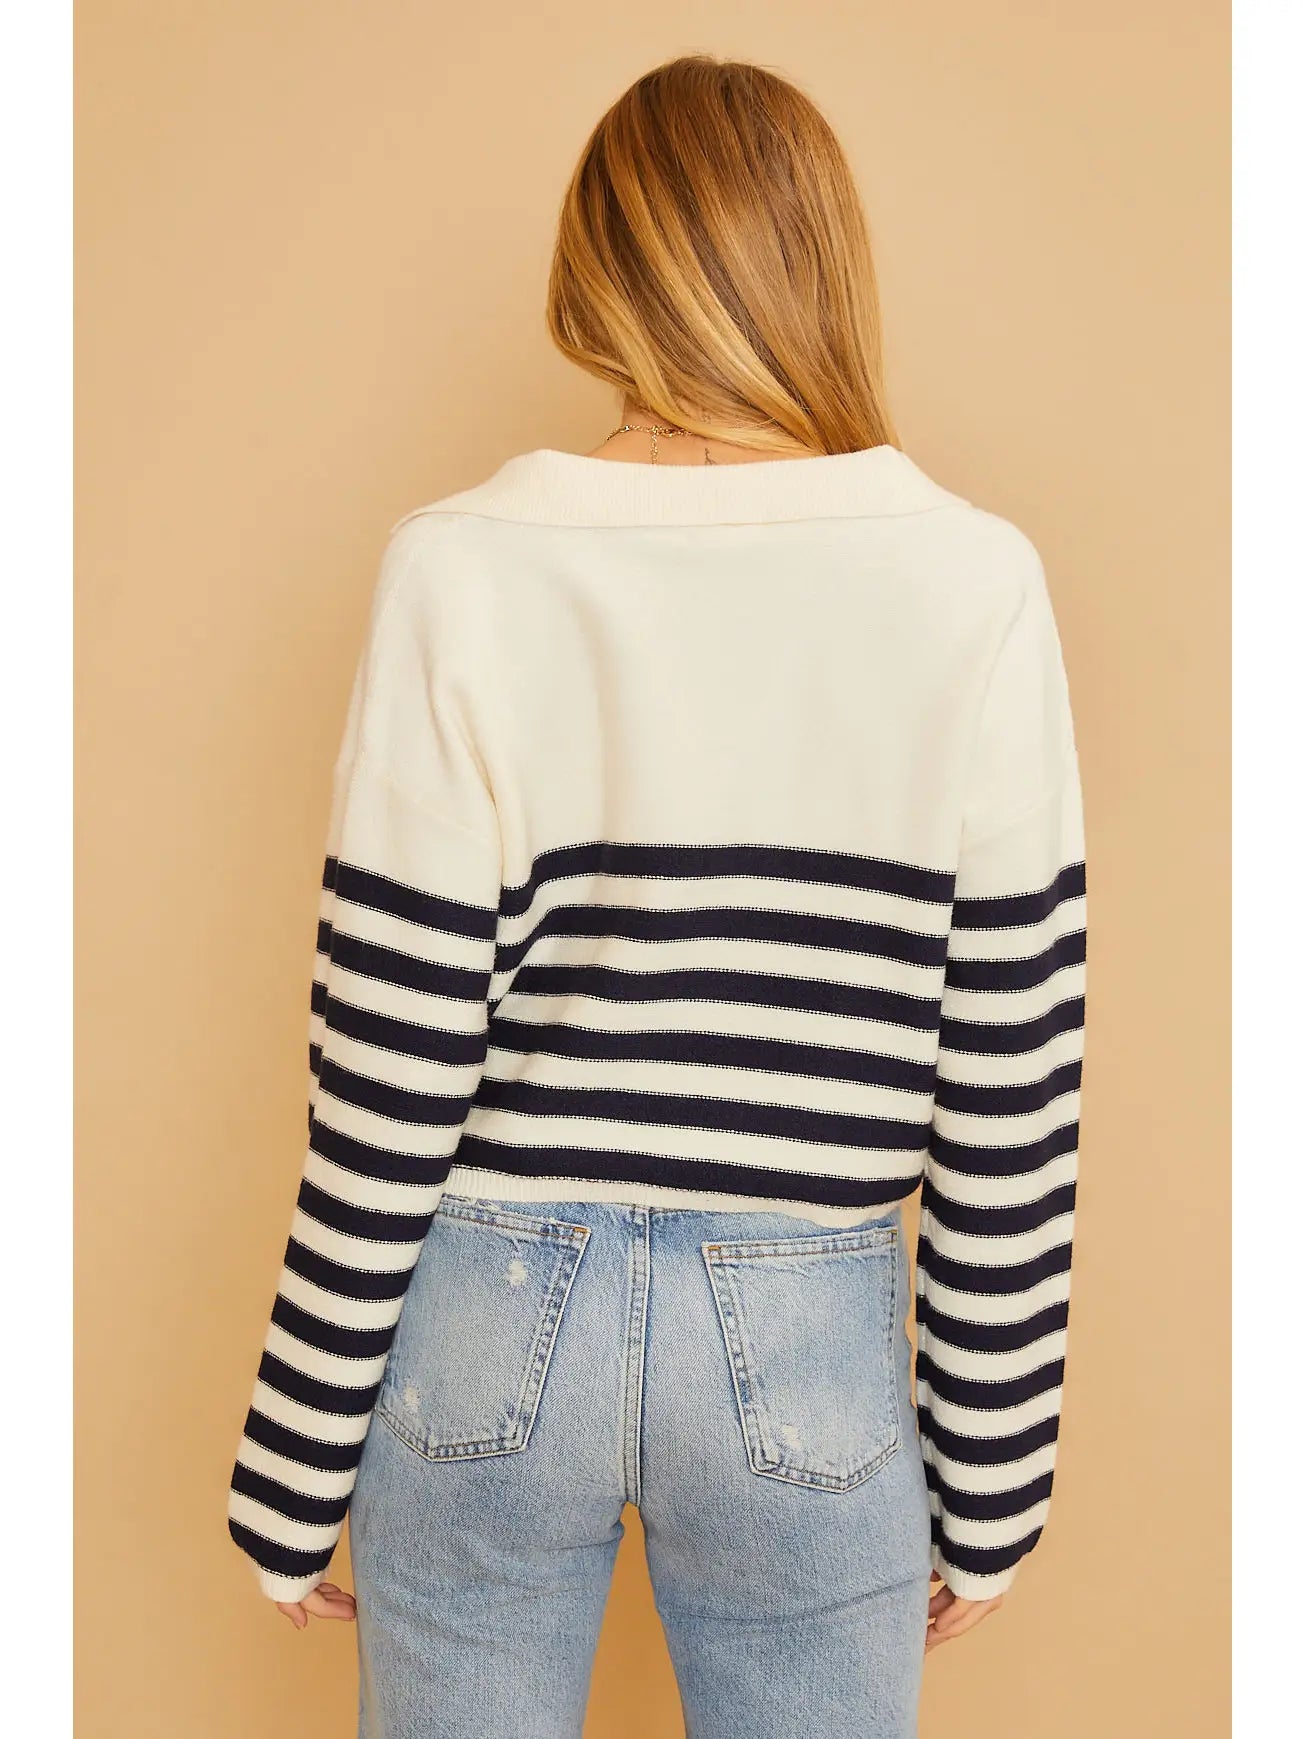 Ahoy Striped Sweater